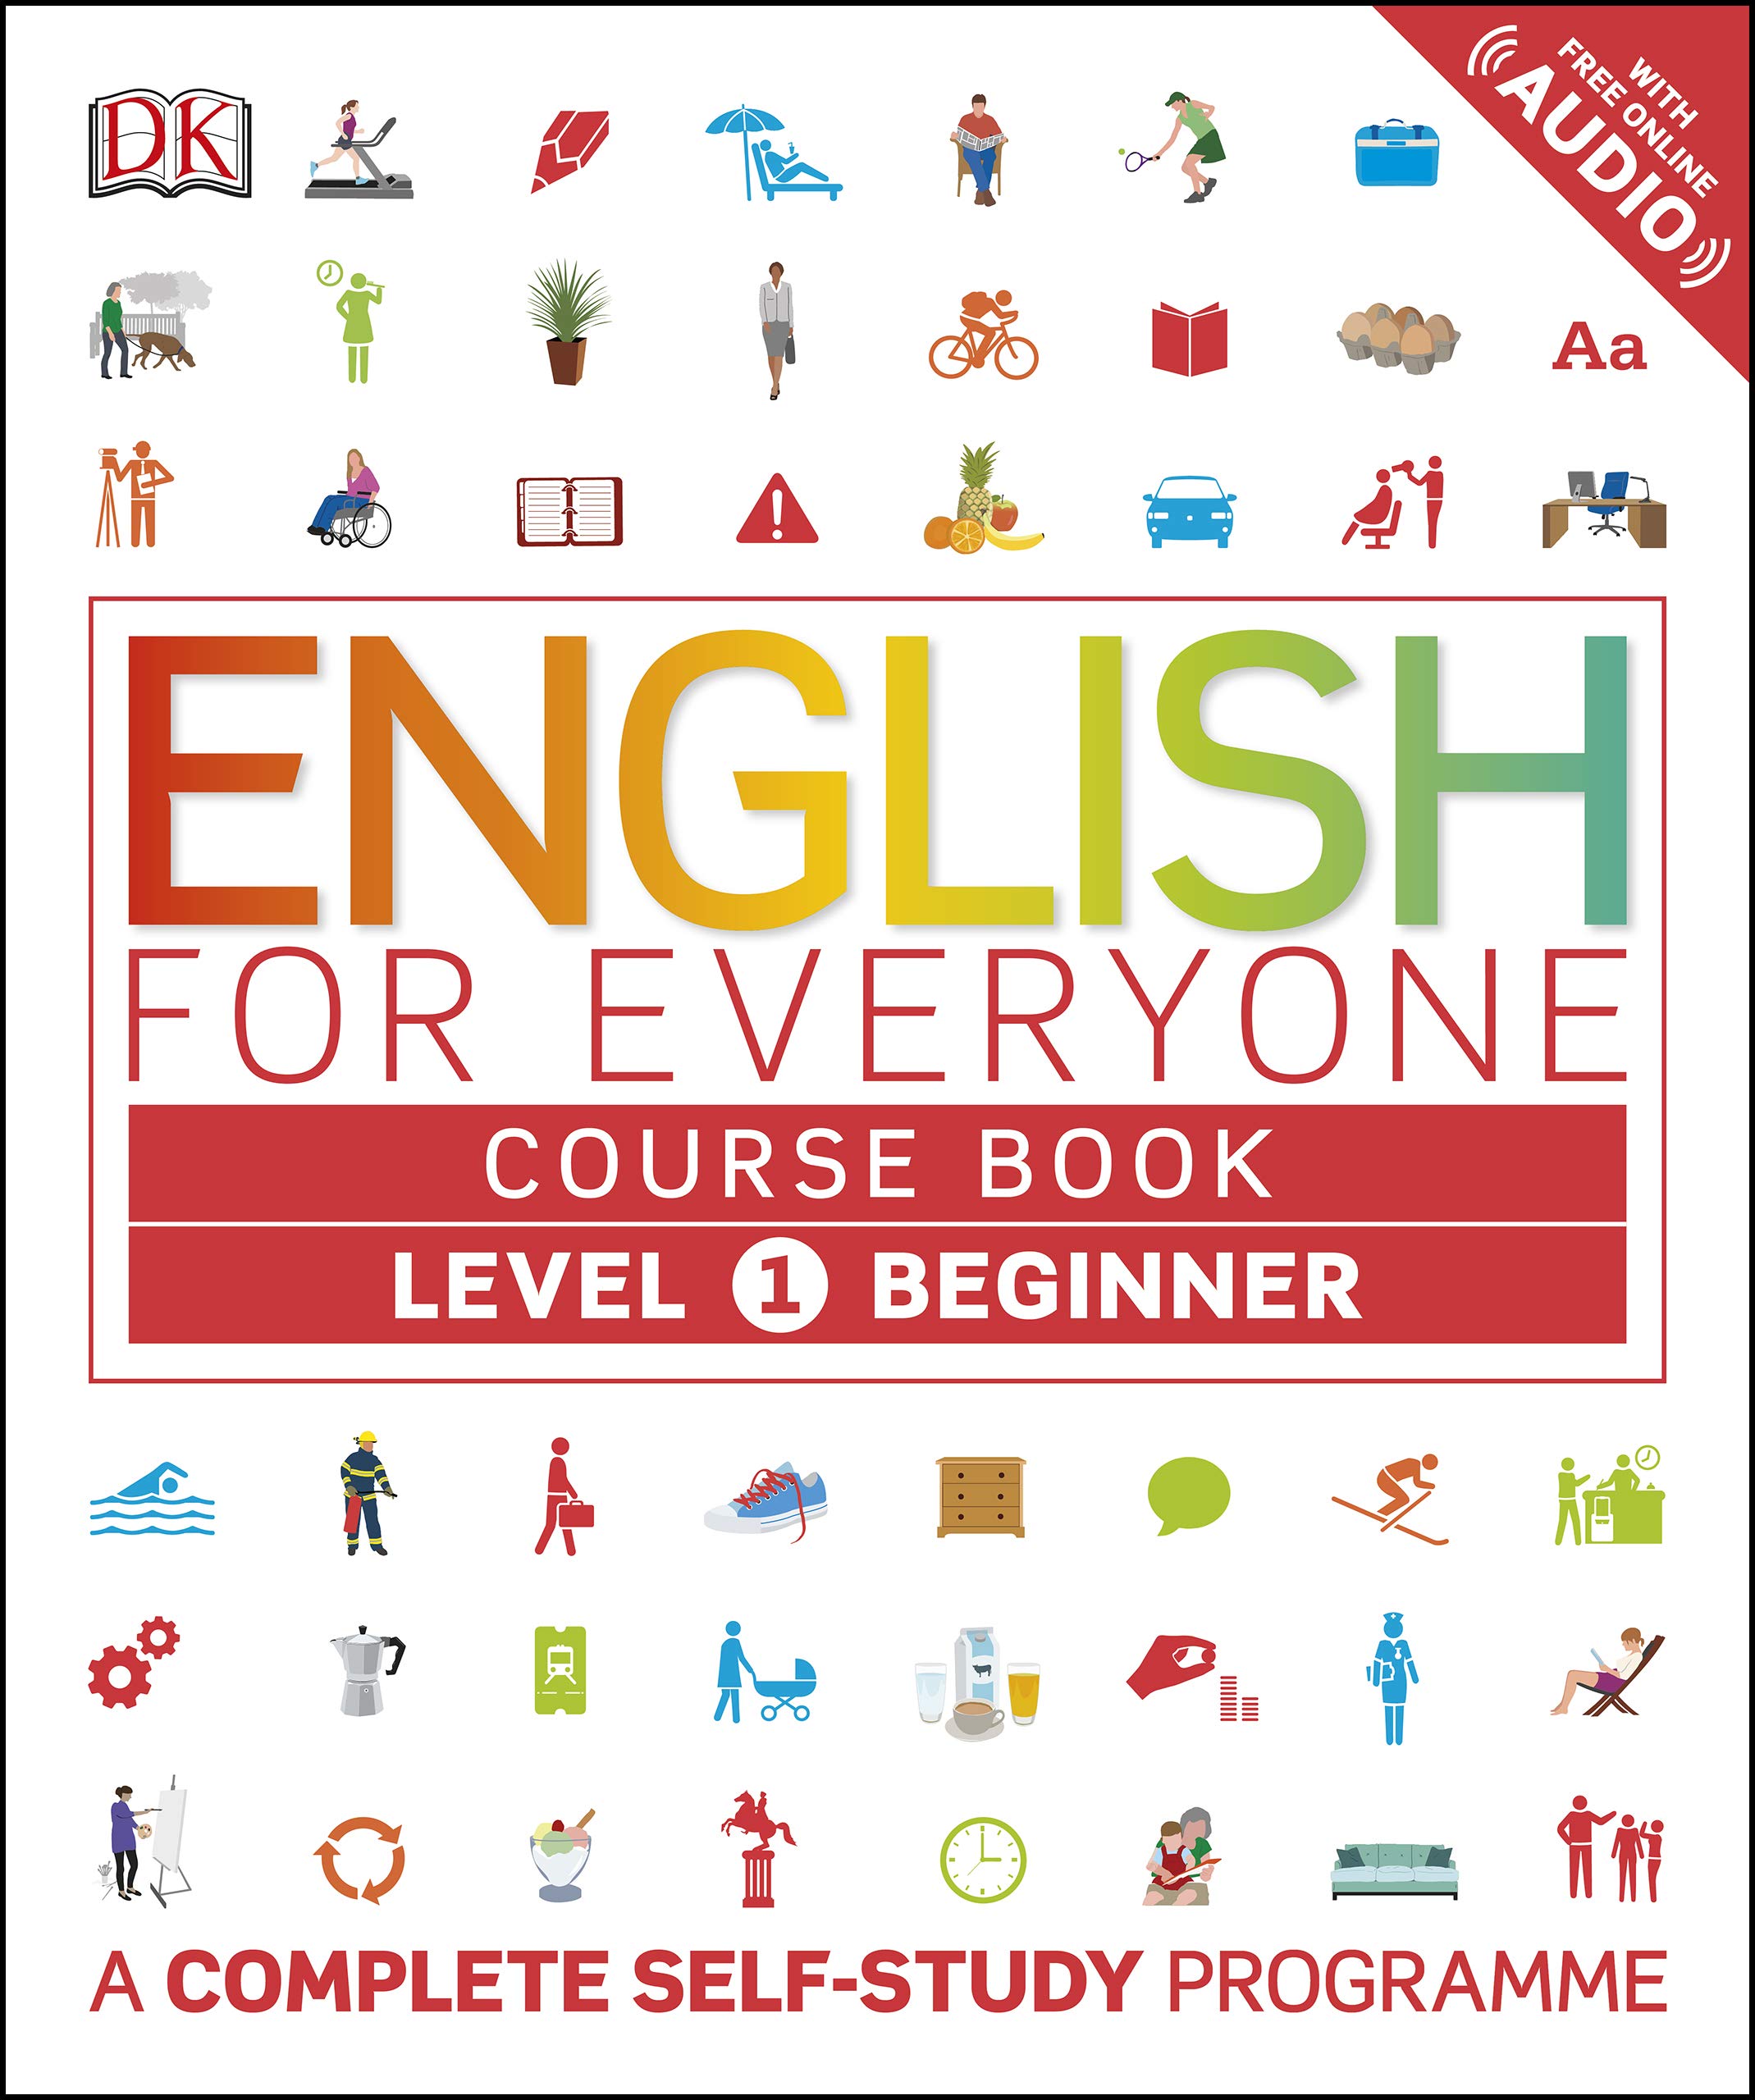 English for Everyone: Level 1: Beginner, Course Book: A Complete Self-Study Program (Kindle eBook) by DK $1.99